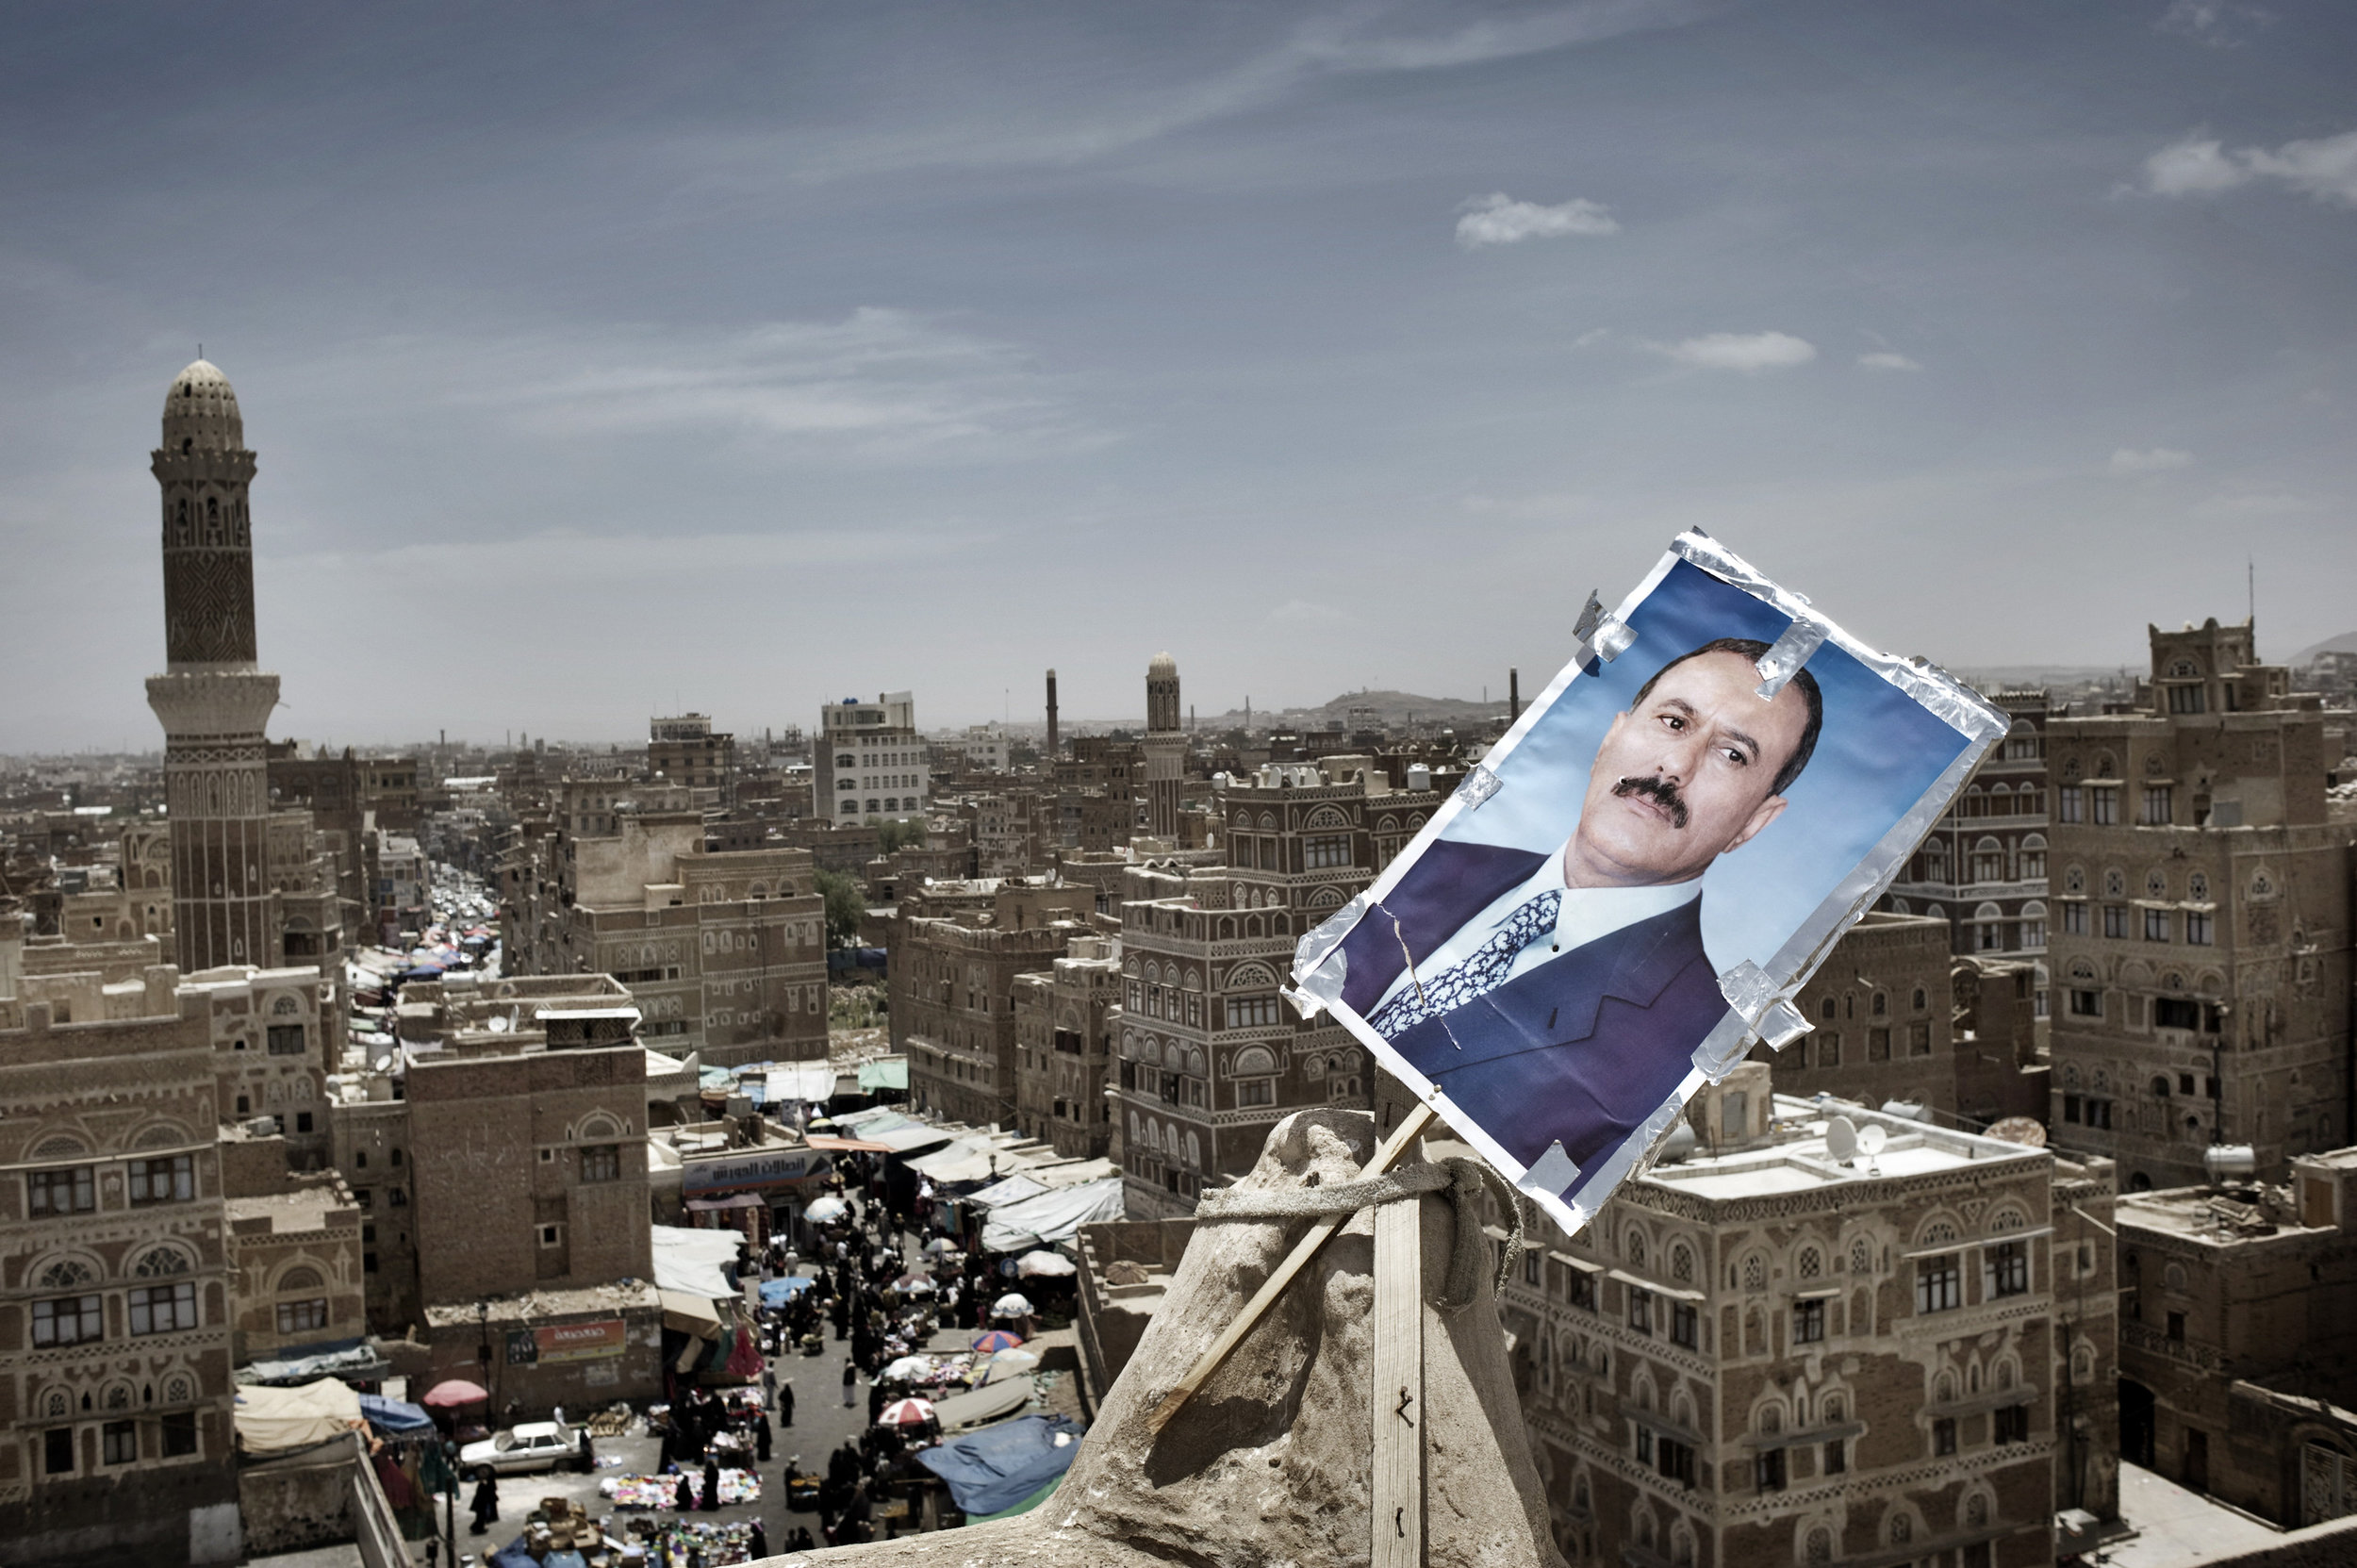  SANAA YEMEN-- MAY 2011: 
 A poster of Yemen's President Ali Abdullah Saleh   is seen  at  the  roof  of  the  house  at  the old  town  of Sanaa

 